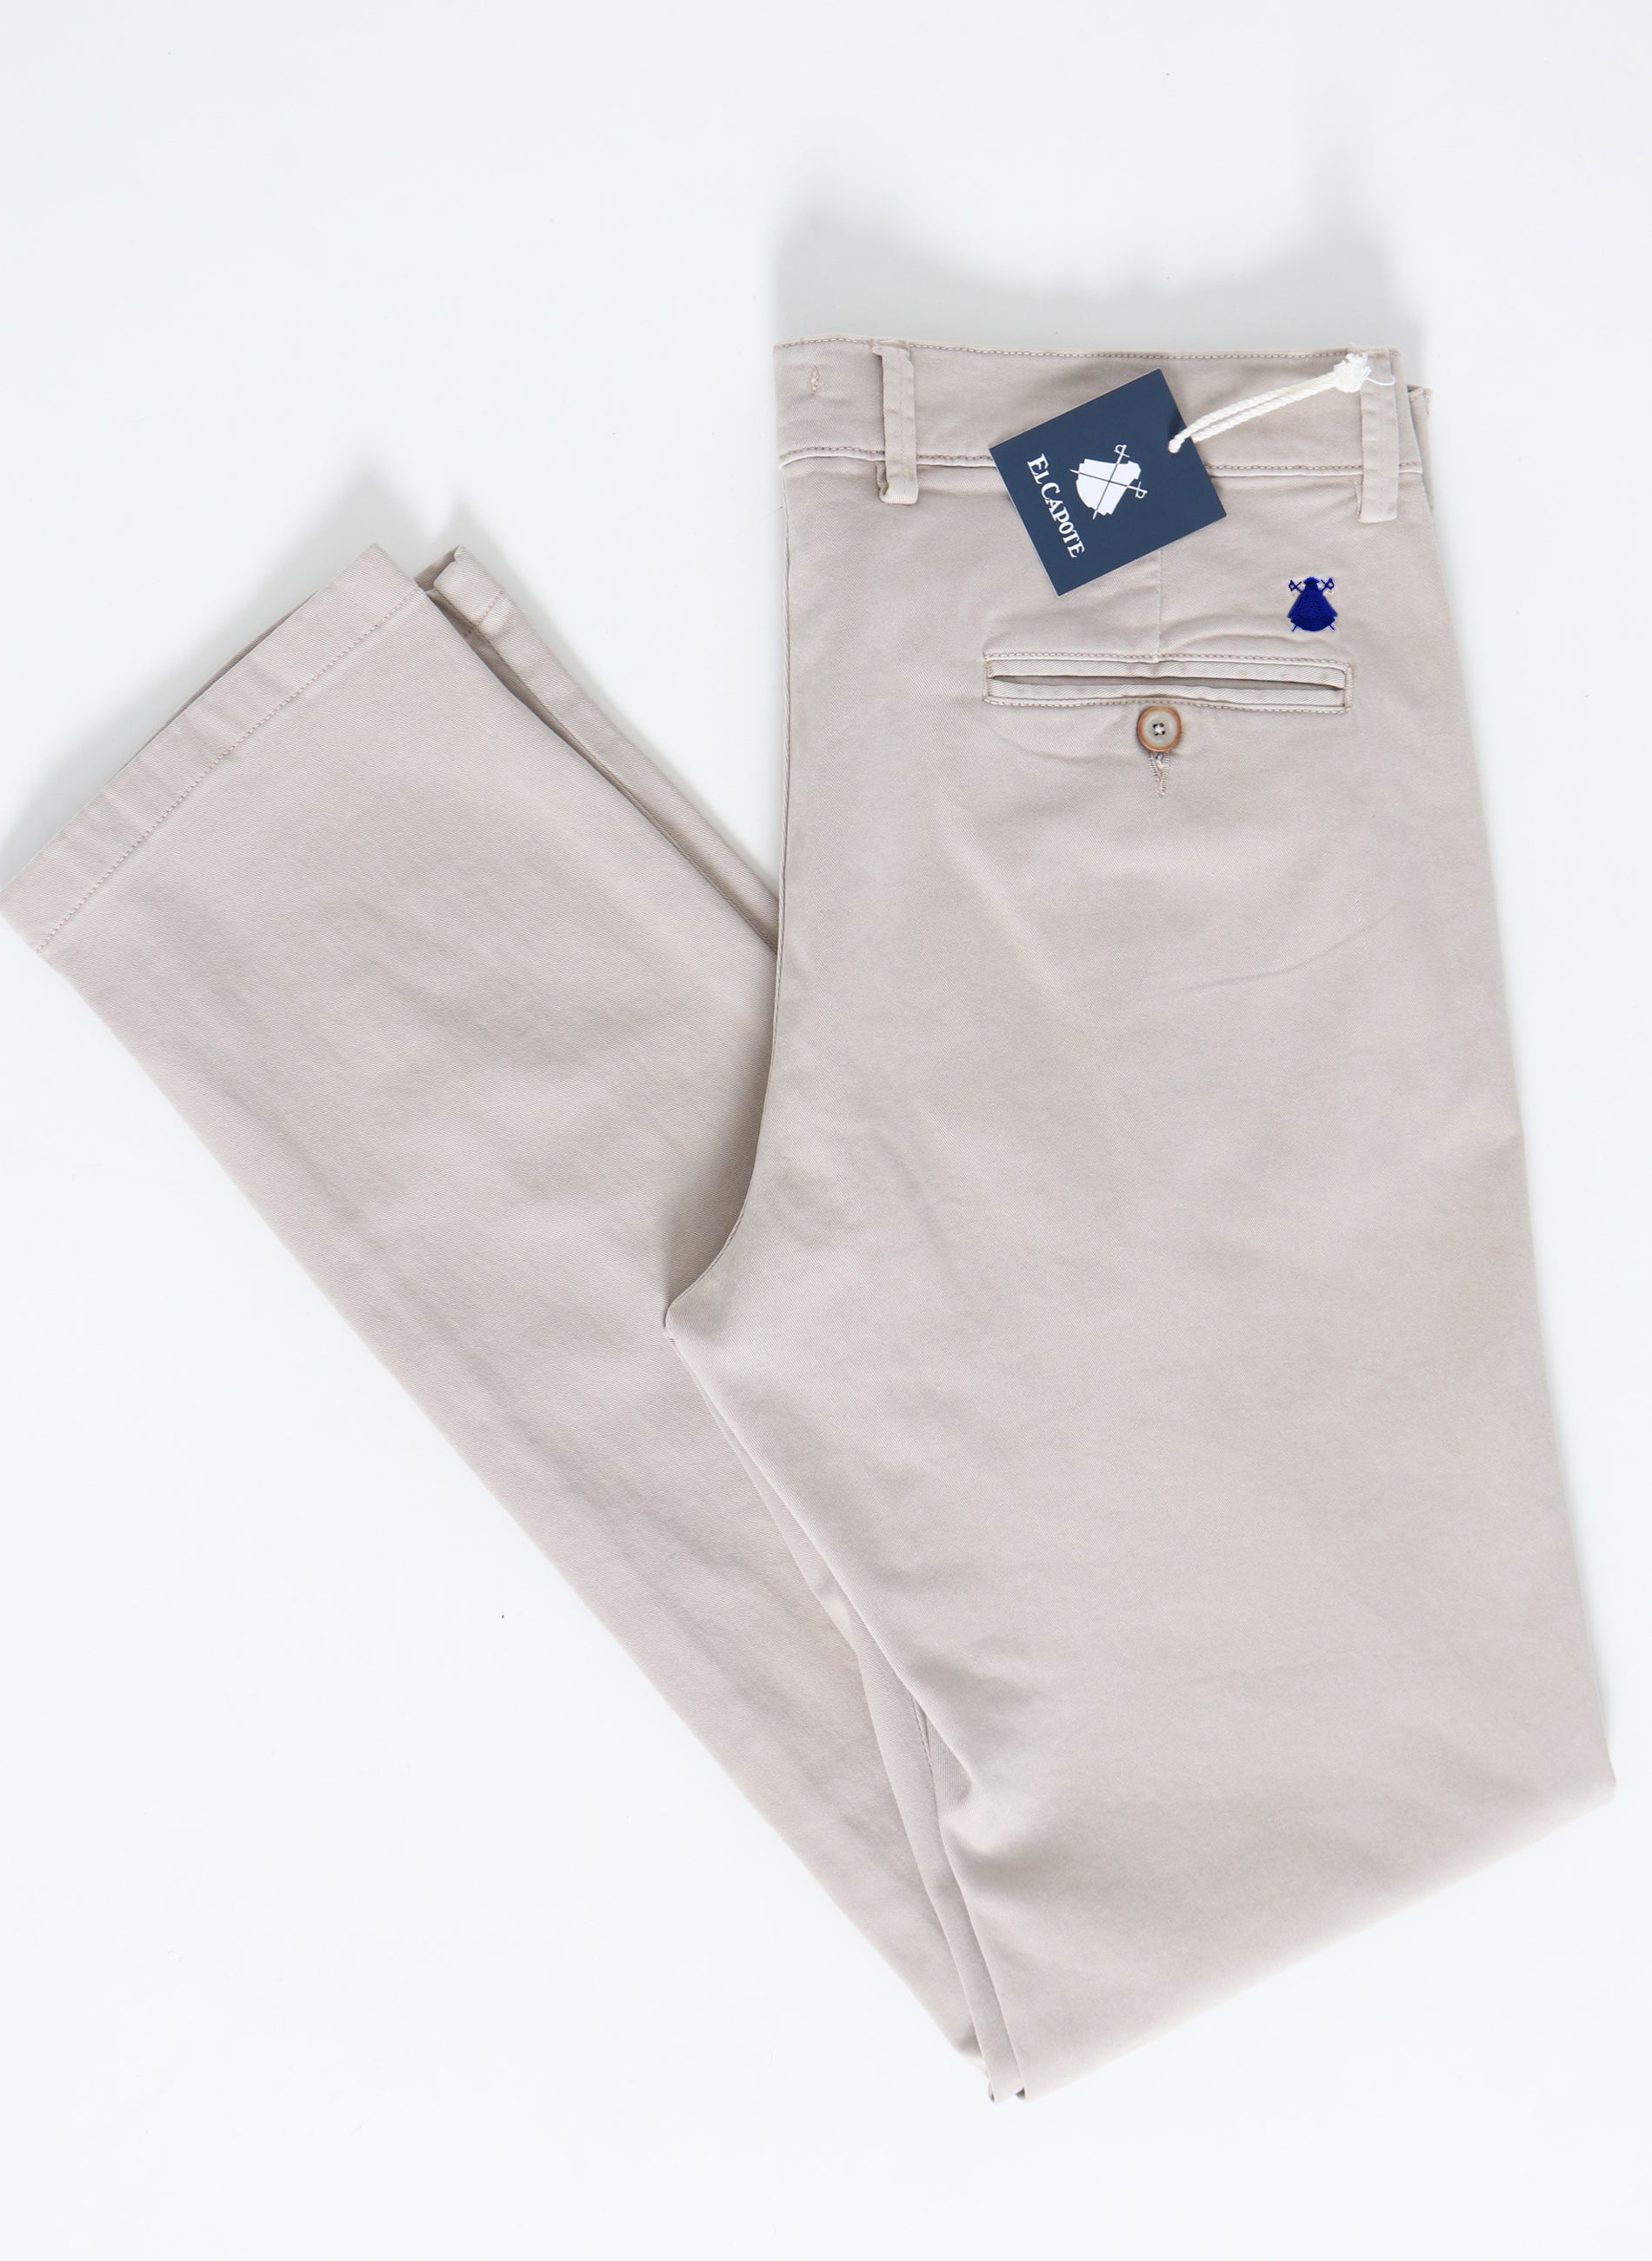 Men's Trousers - Slim Fit Chinos & Jeans | JDC Store Online